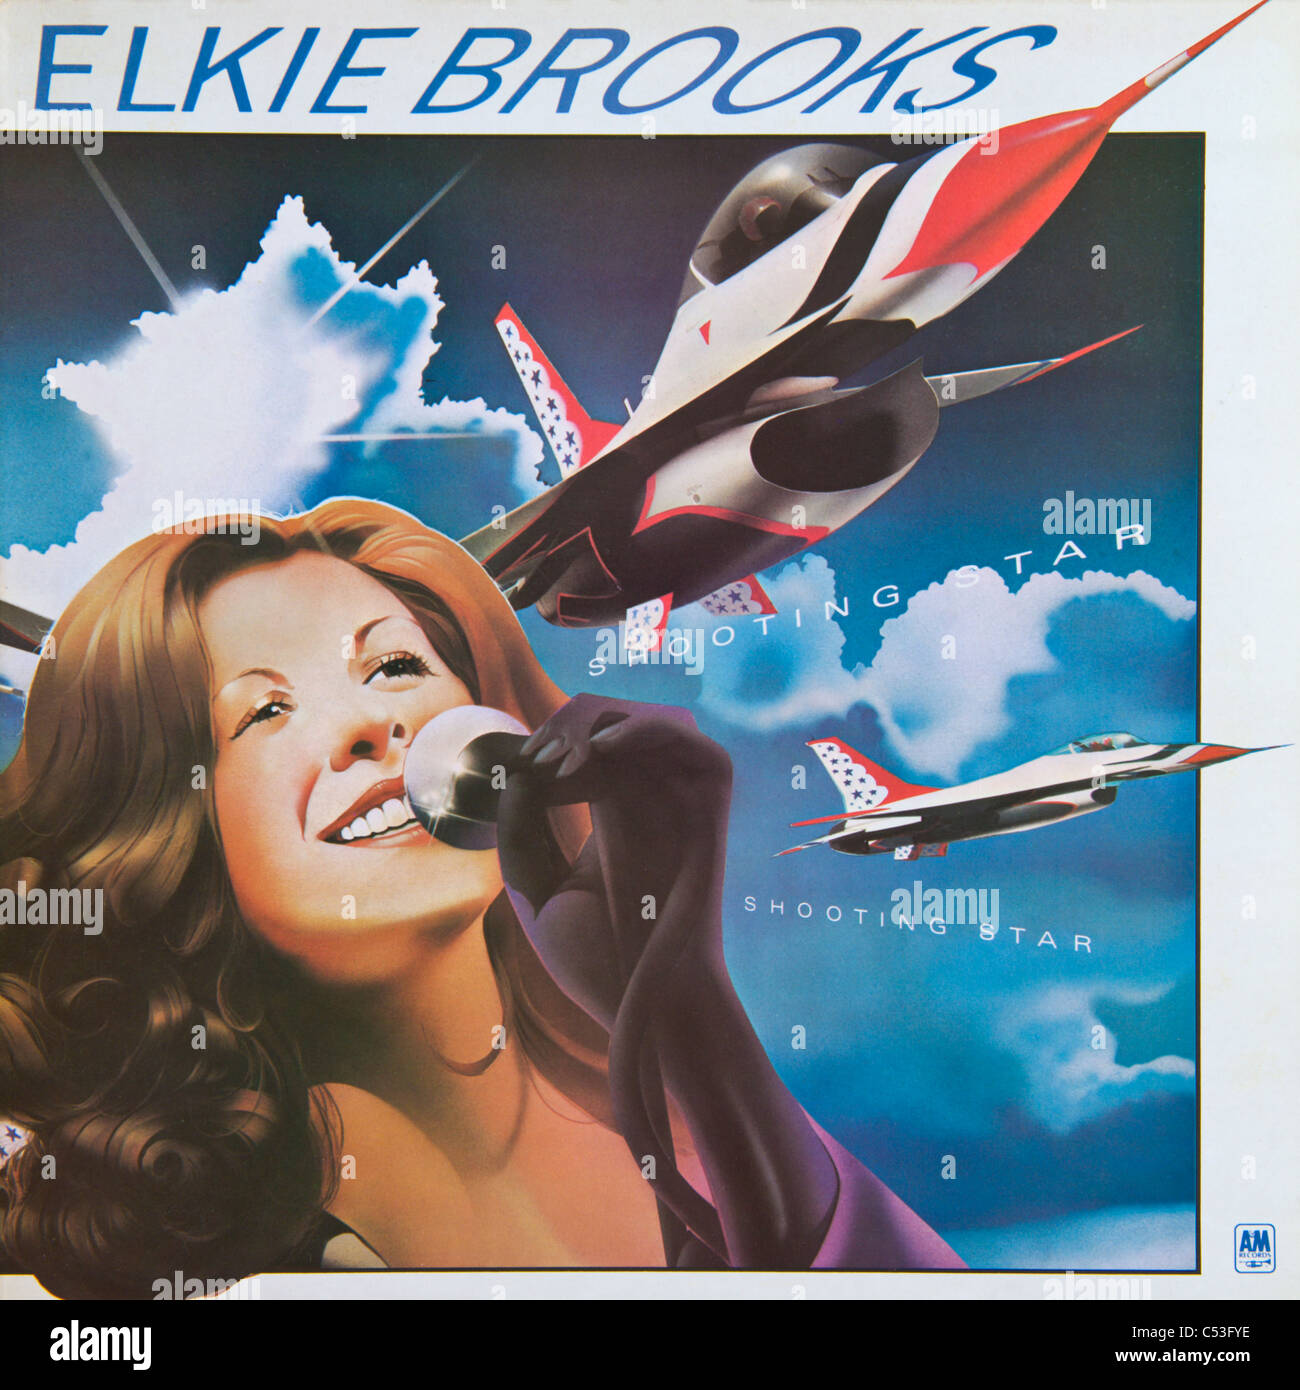 Cover of original vinyl album Shooting Star by Elkie Brooks released 1978 on A&M Records Stock Photo